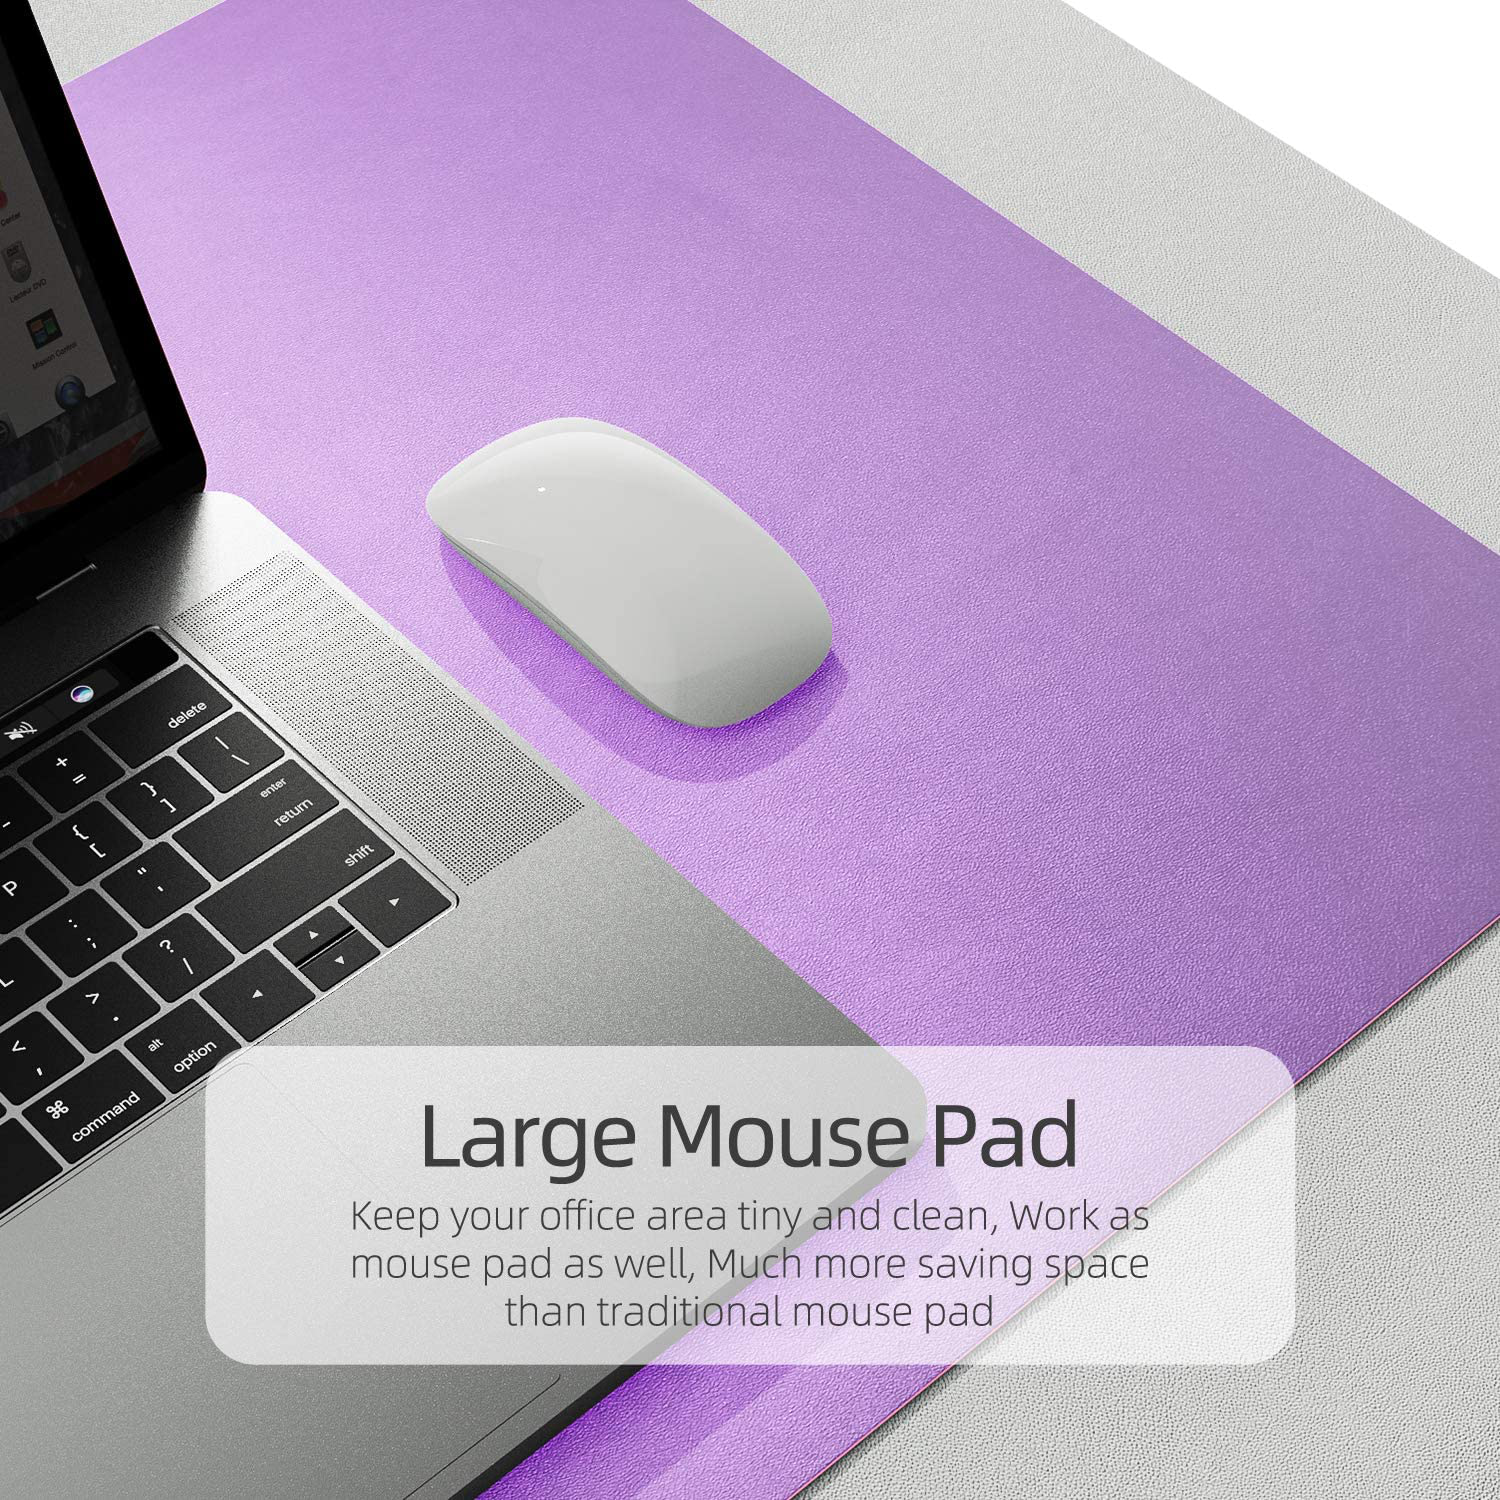 YSAGi Multifunctional Office Desk Pad, Ultra Thin Waterproof PU Leather Mouse Pad, Dual Use Desk Writing Mat for Office/Home (23.6" x 13.7", Grey)